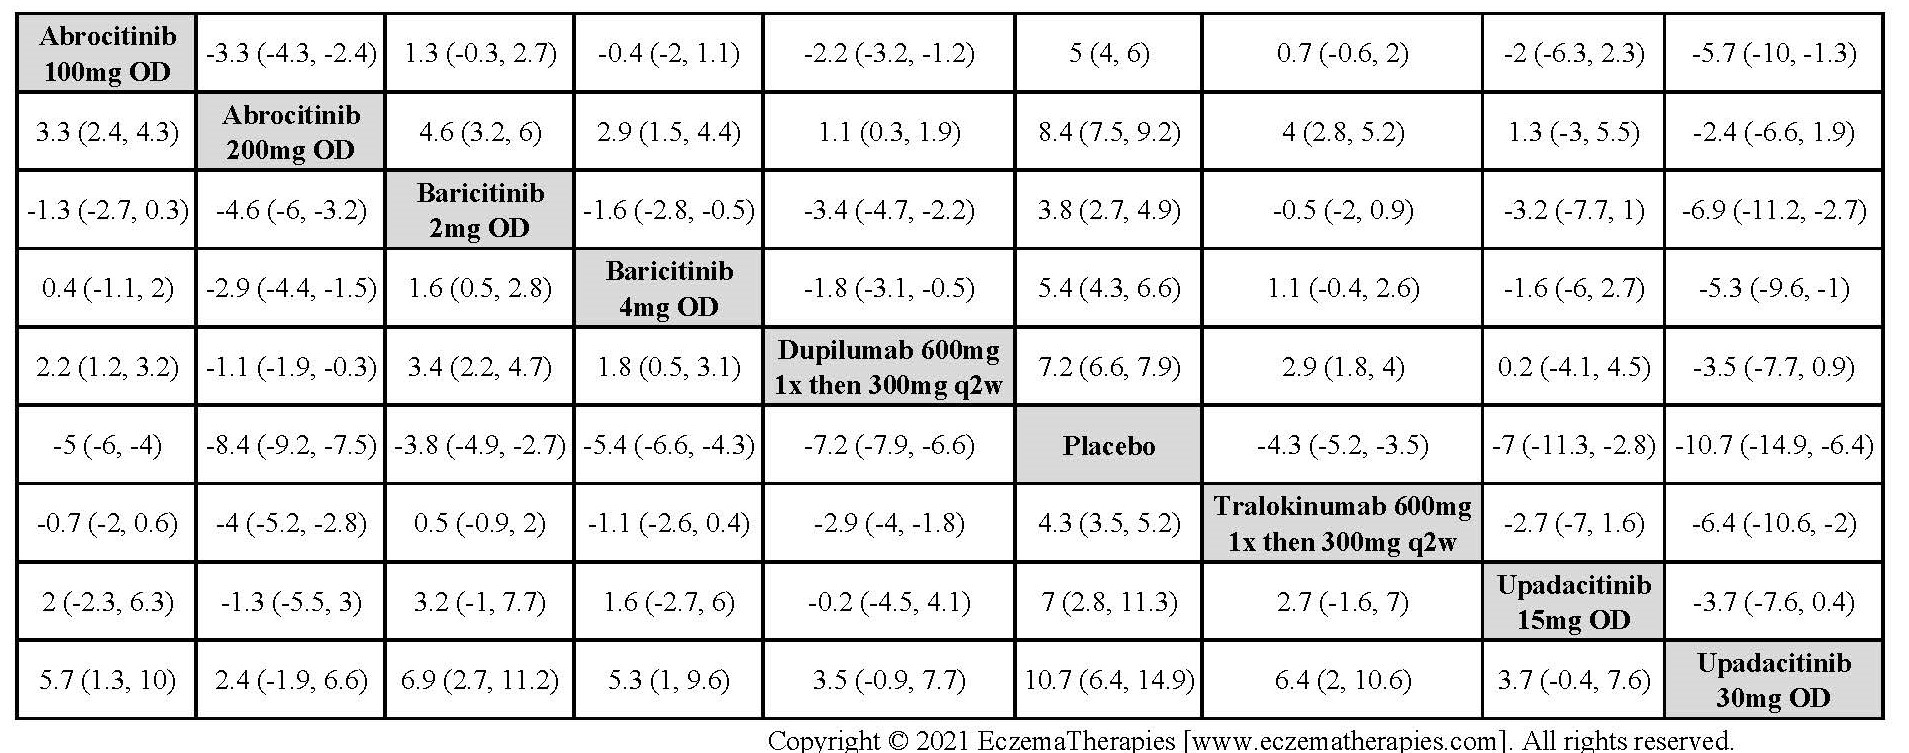 League table with relative effect estimates for change in POEM up to 16 weeks of treatment for selected medications and placebo in adults.